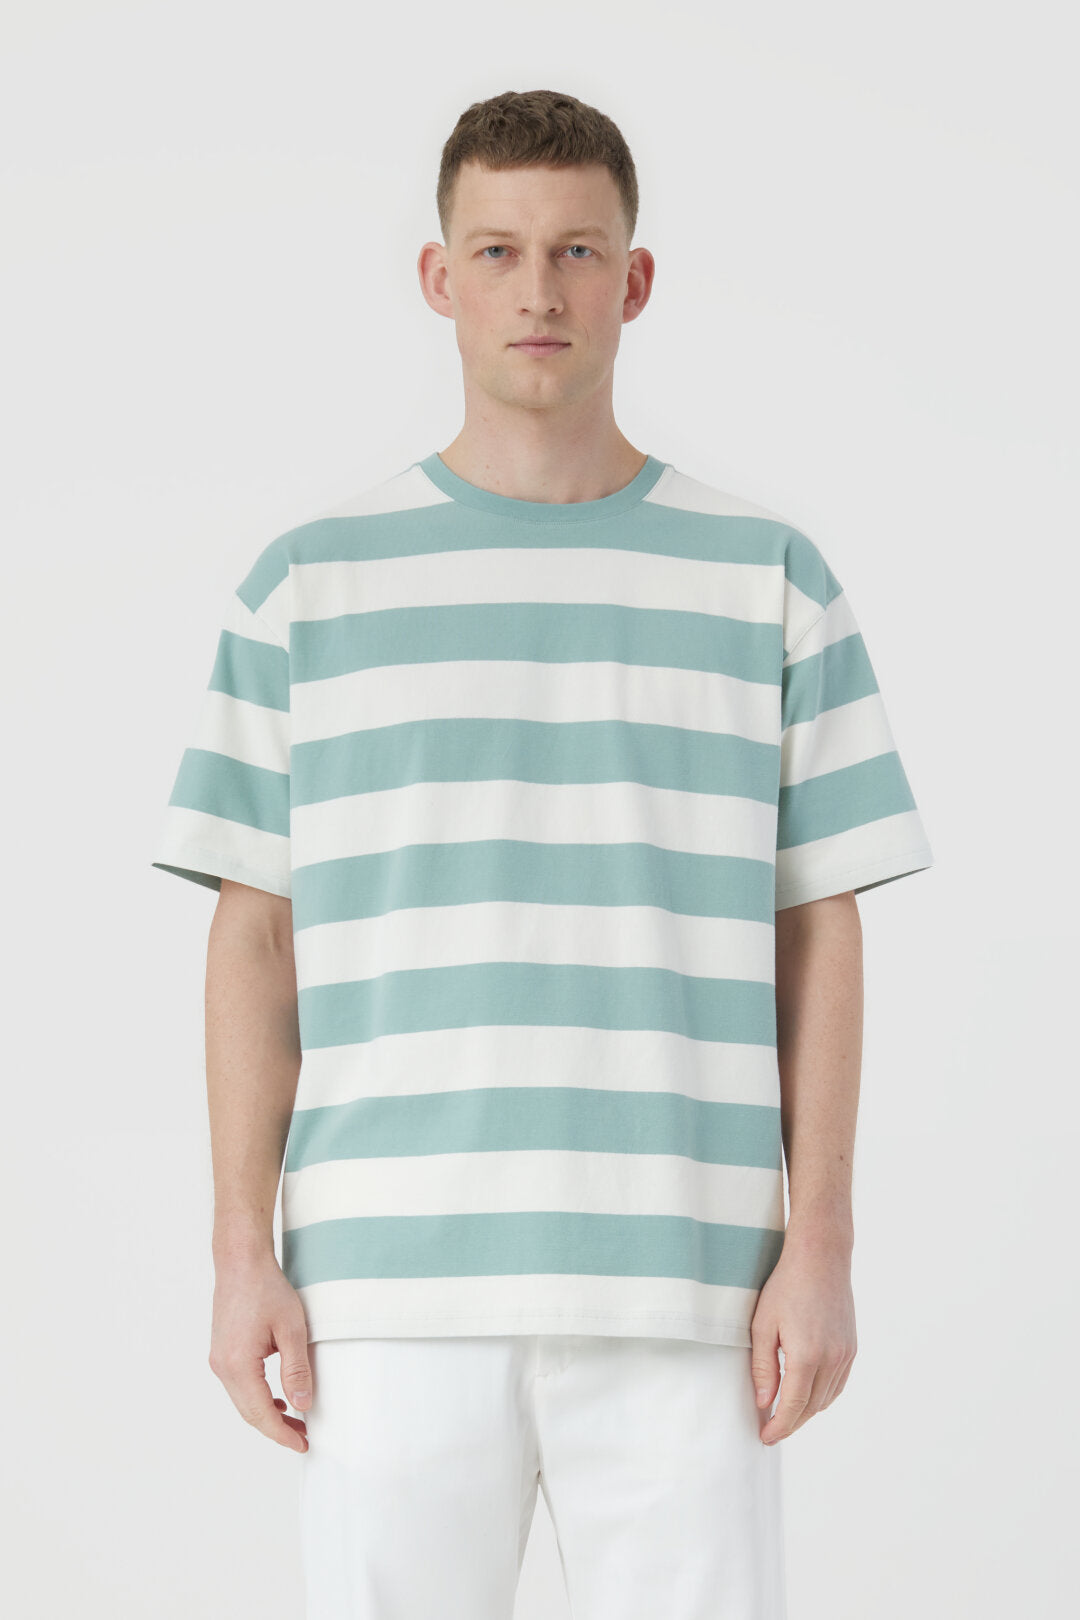 CLOSED MENS STRIPED T-SHIRT - BLUE AGAVE